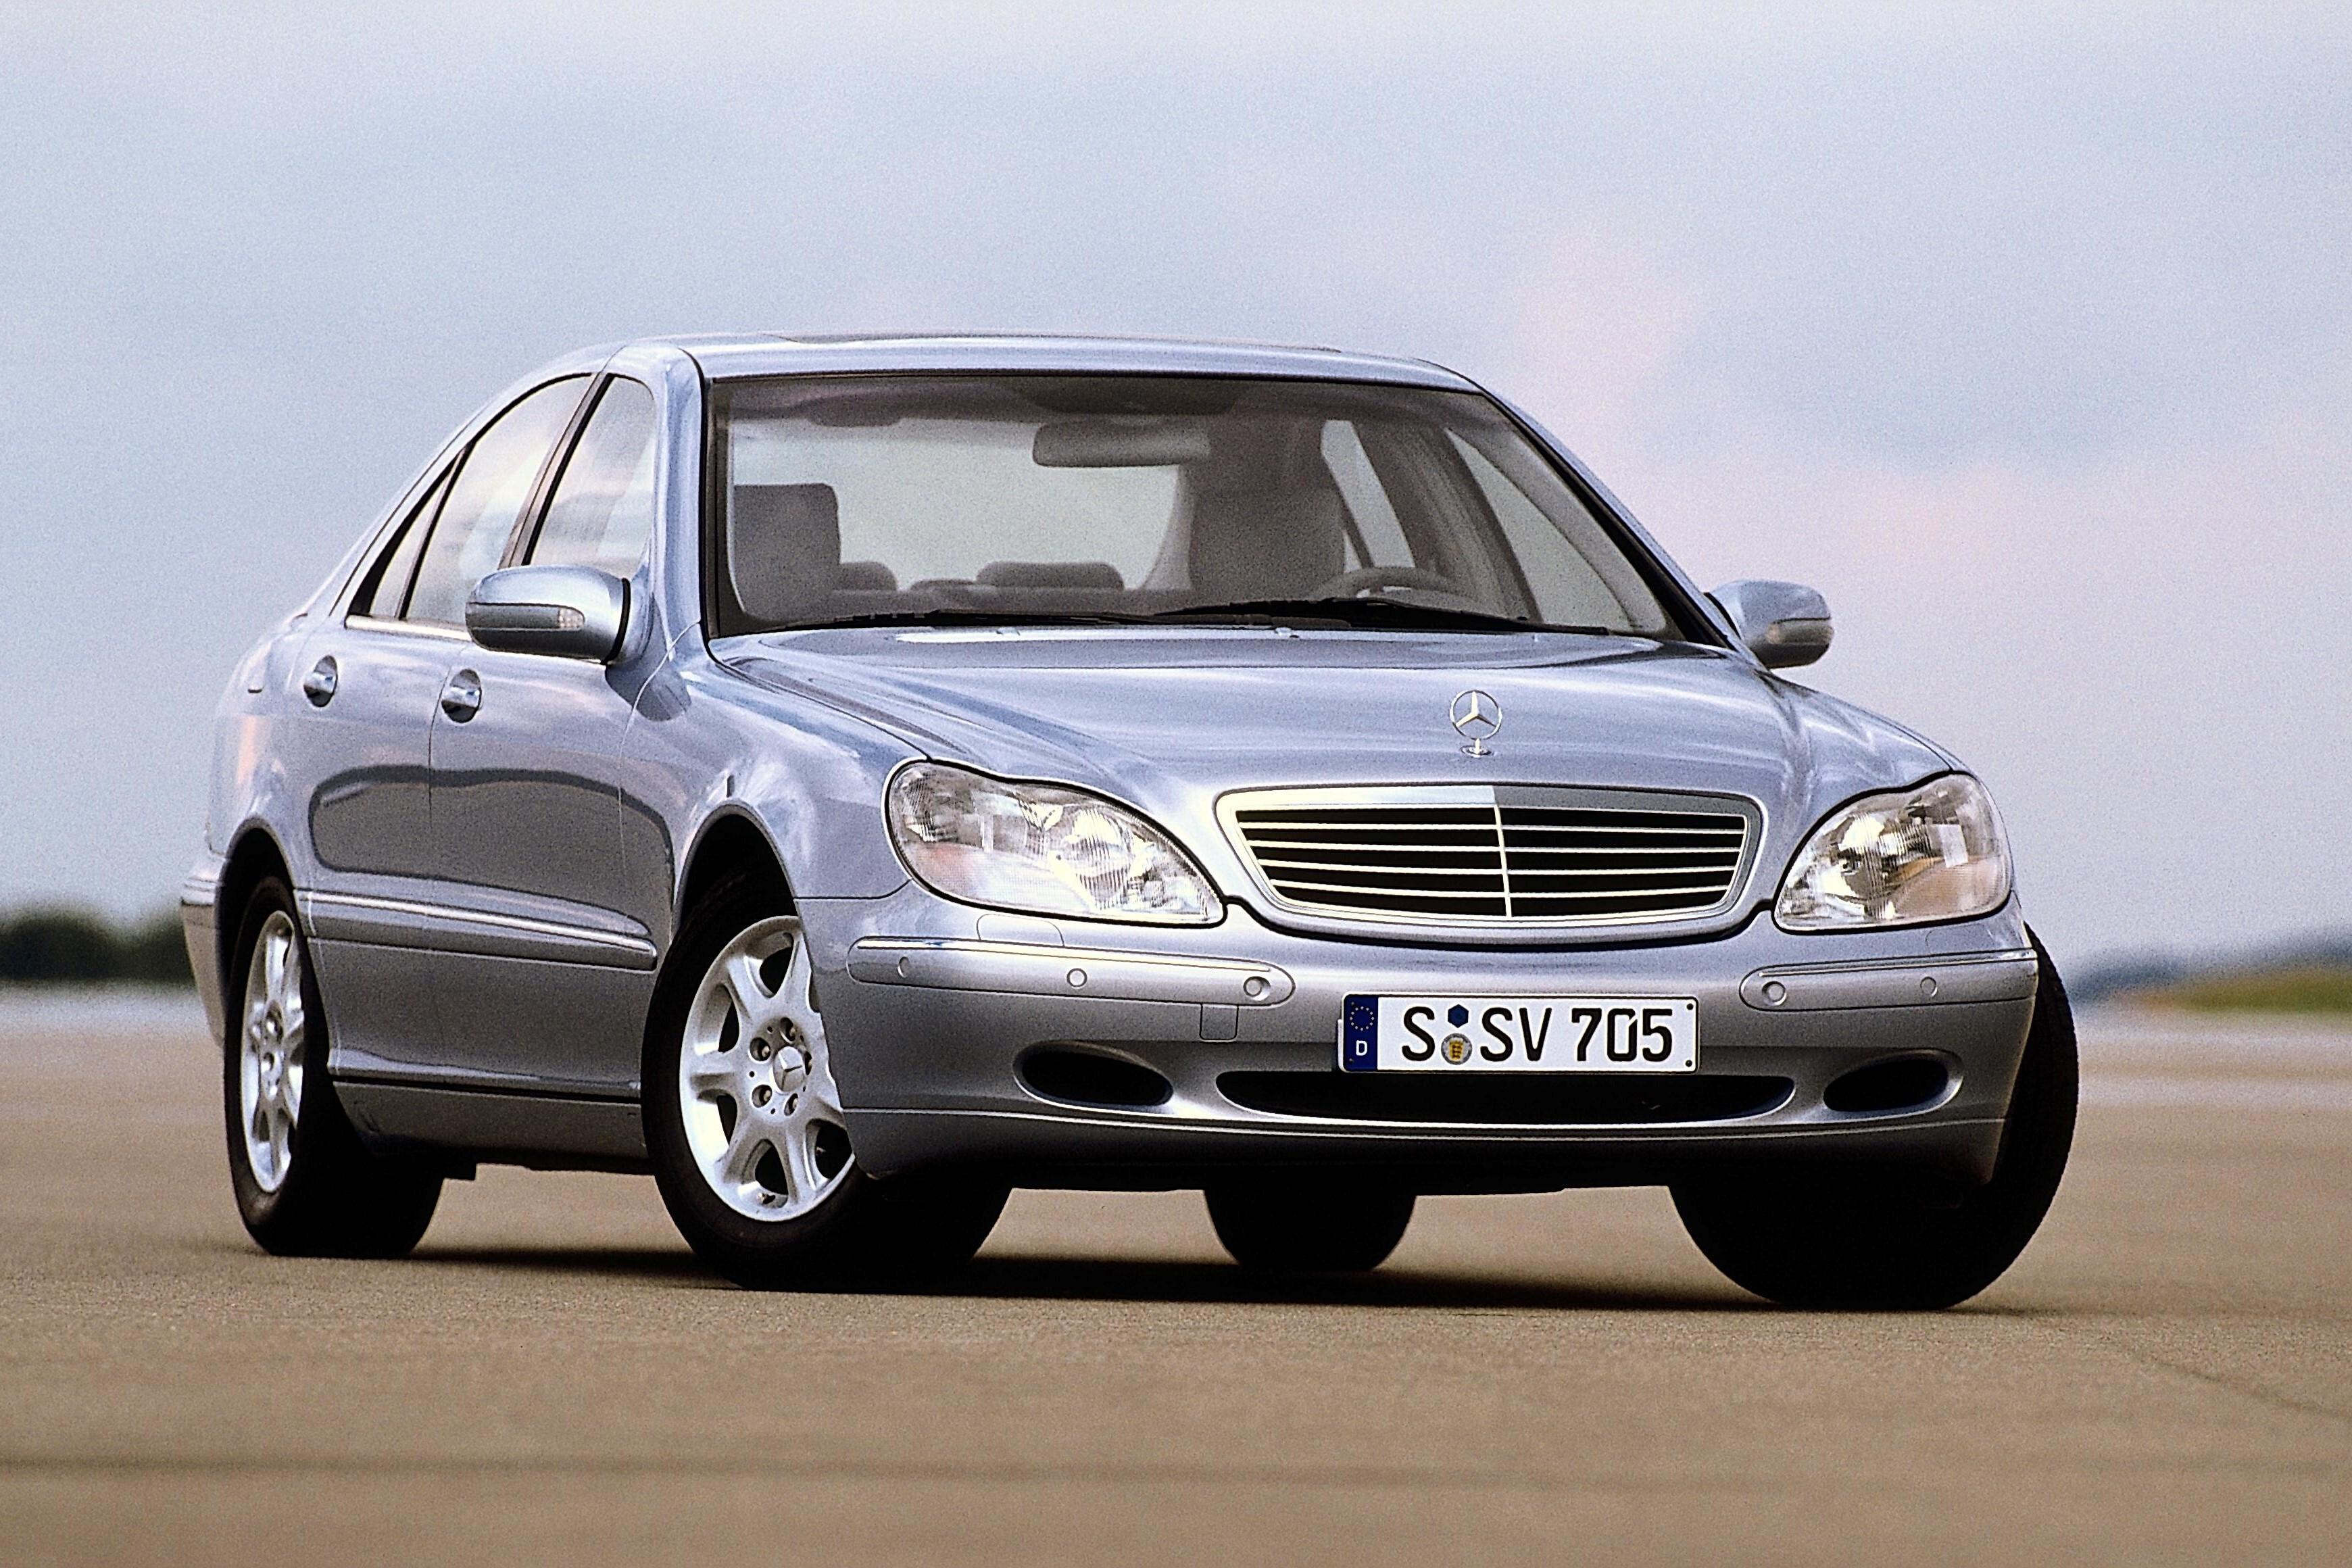 Mercedes s320. Mercedes-Benz w220. Mercedes Benz s w220. Mercedes Benz s class w220. Мерседес Бенц s класс 220.